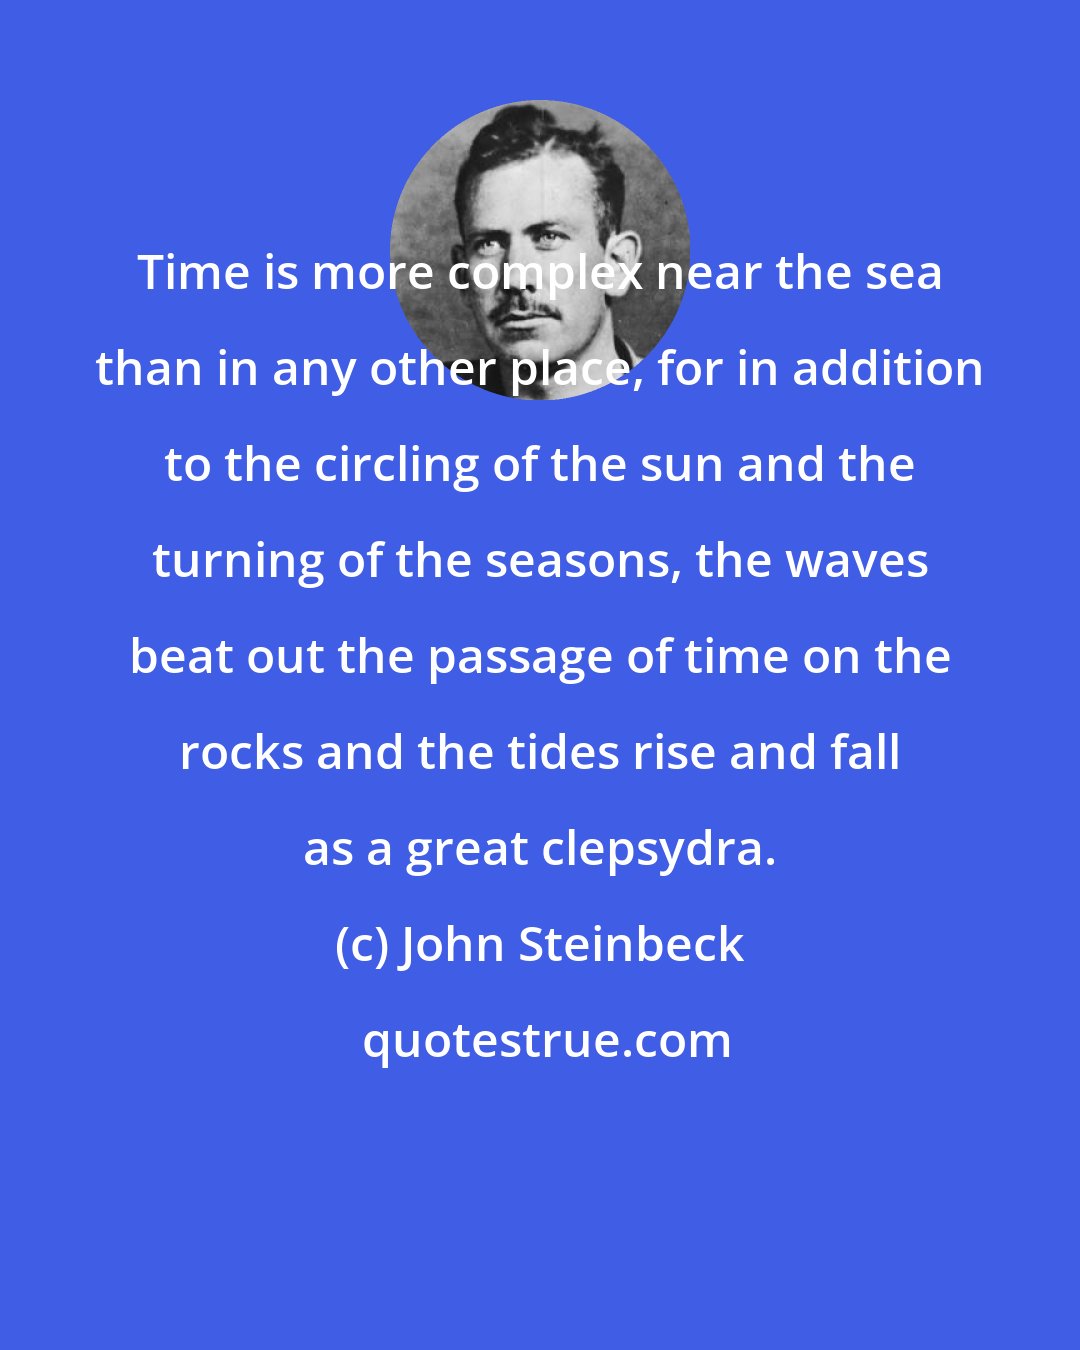 John Steinbeck: Time is more complex near the sea than in any other place, for in addition to the circling of the sun and the turning of the seasons, the waves beat out the passage of time on the rocks and the tides rise and fall as a great clepsydra.